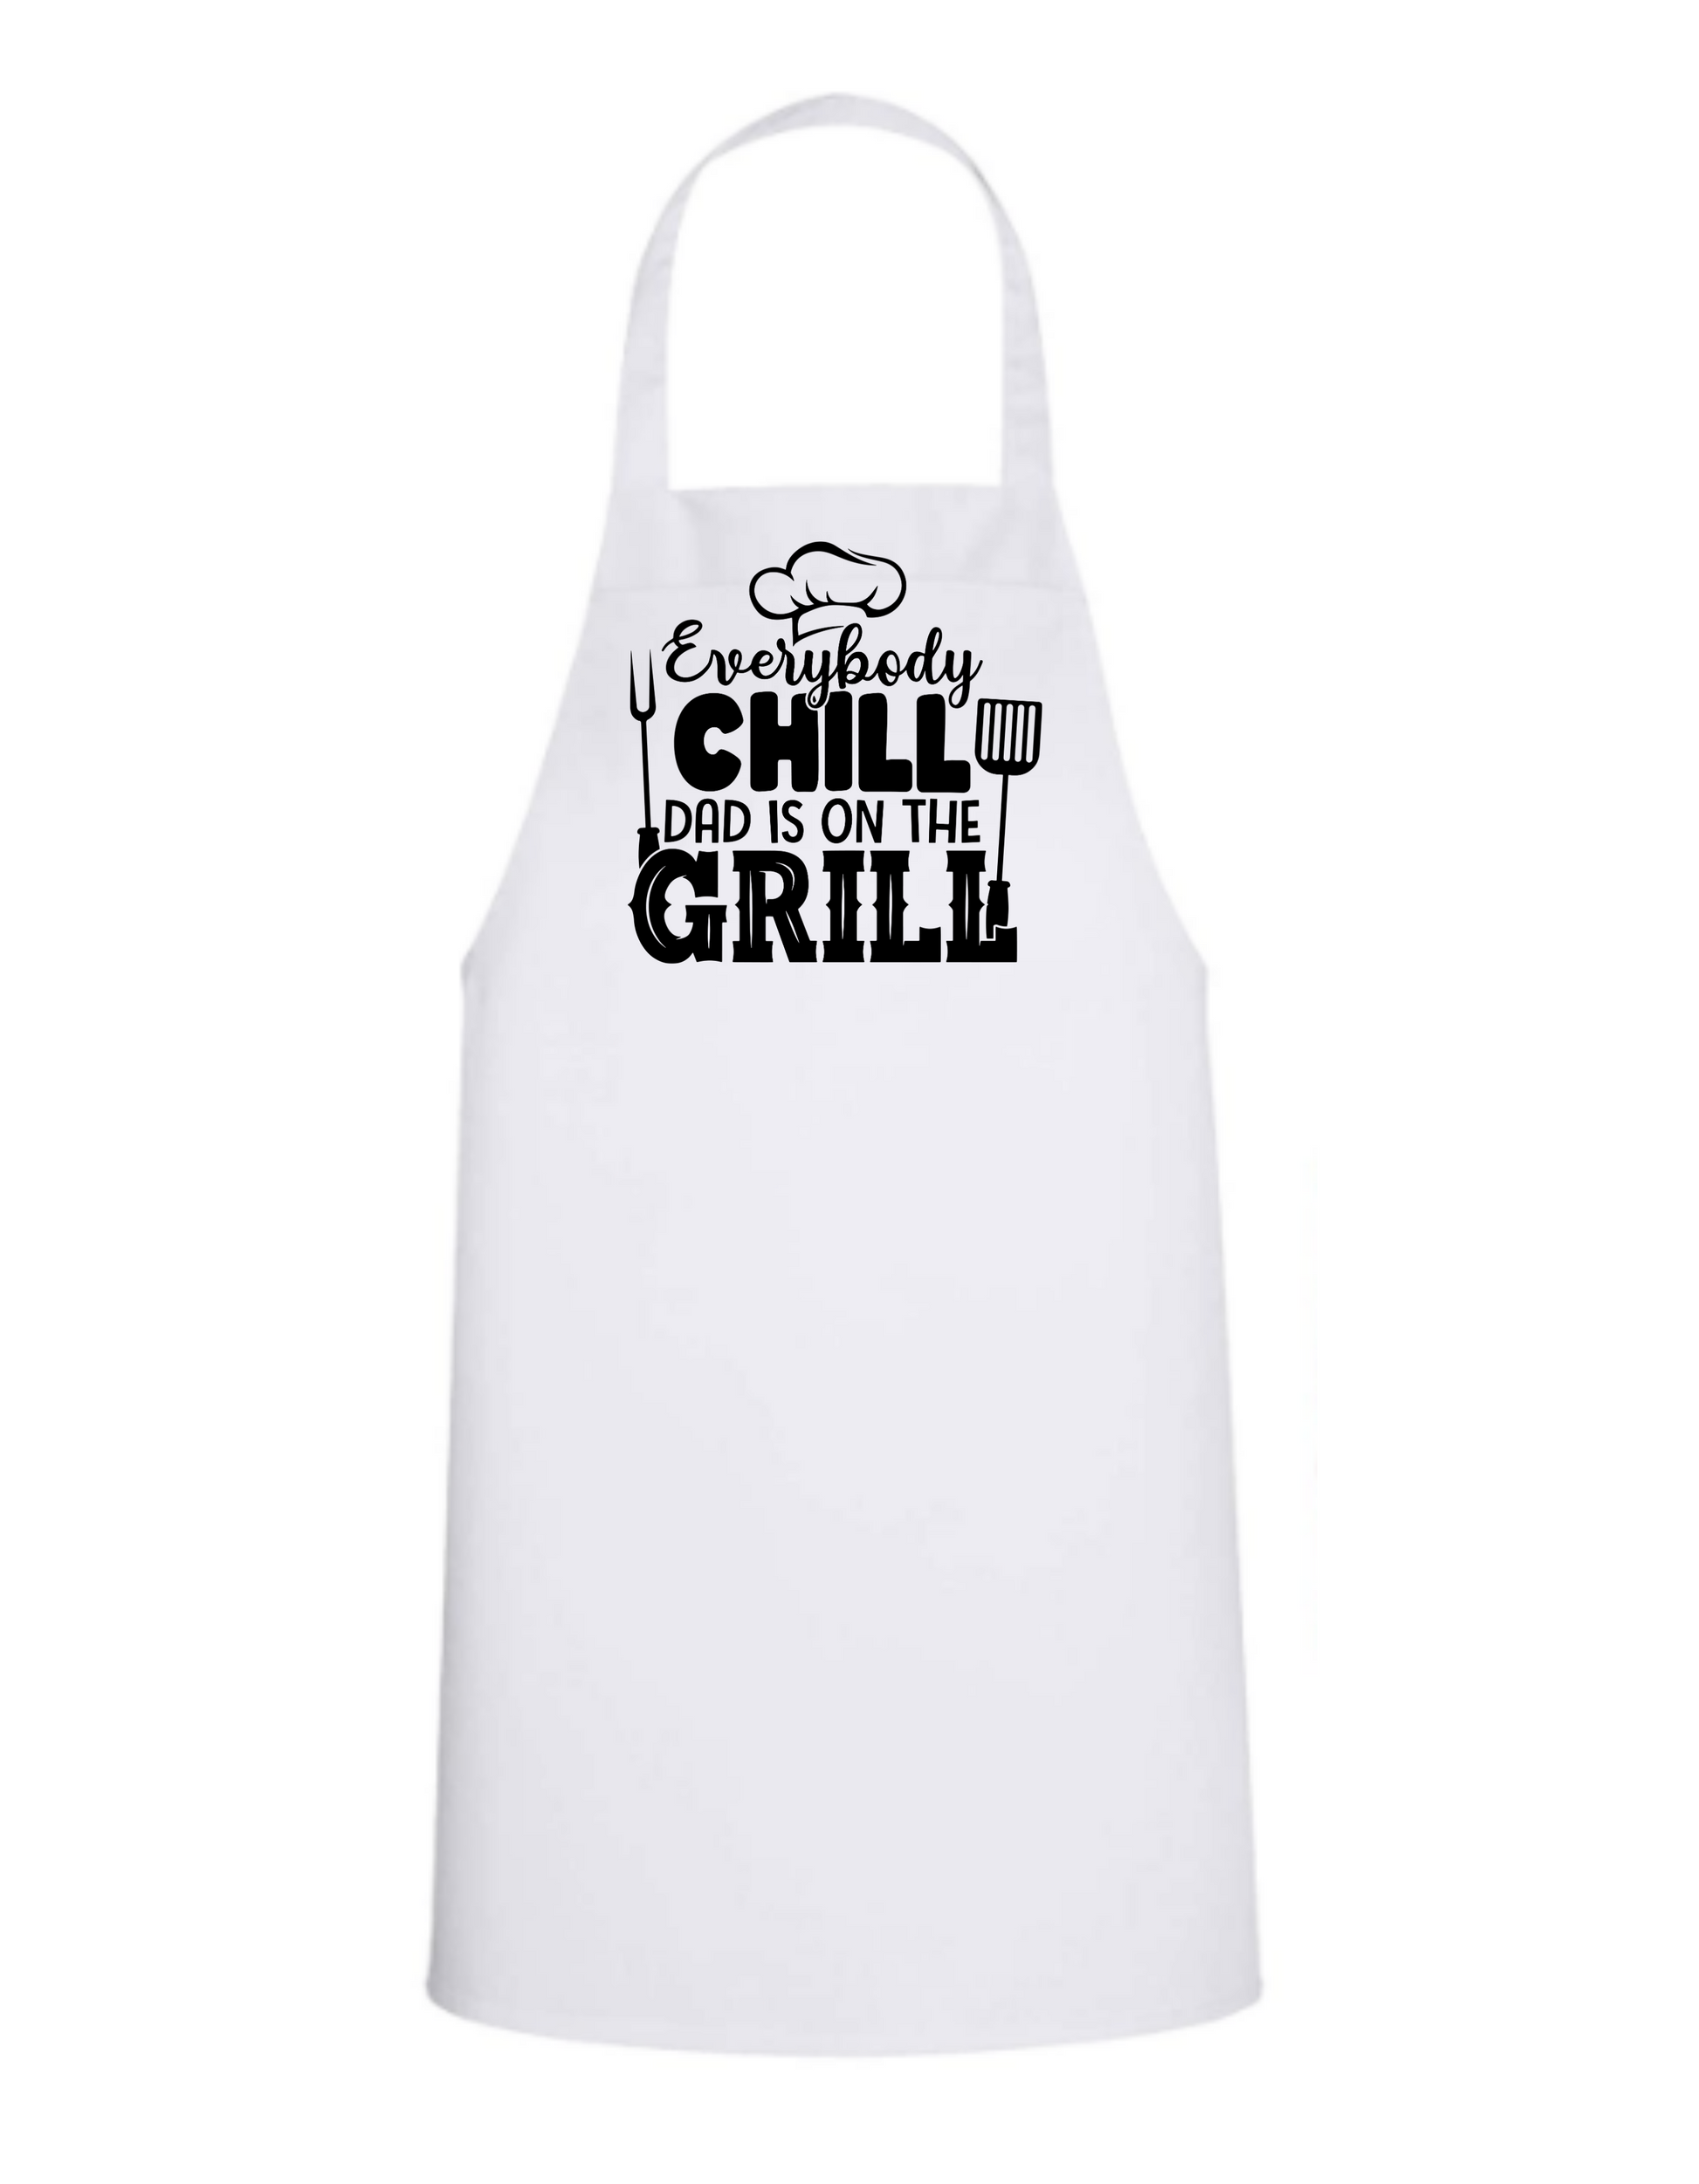 Everybody Chill Dad's on the Grill - White Apron with Black design Great Gift - Mister Snarky's